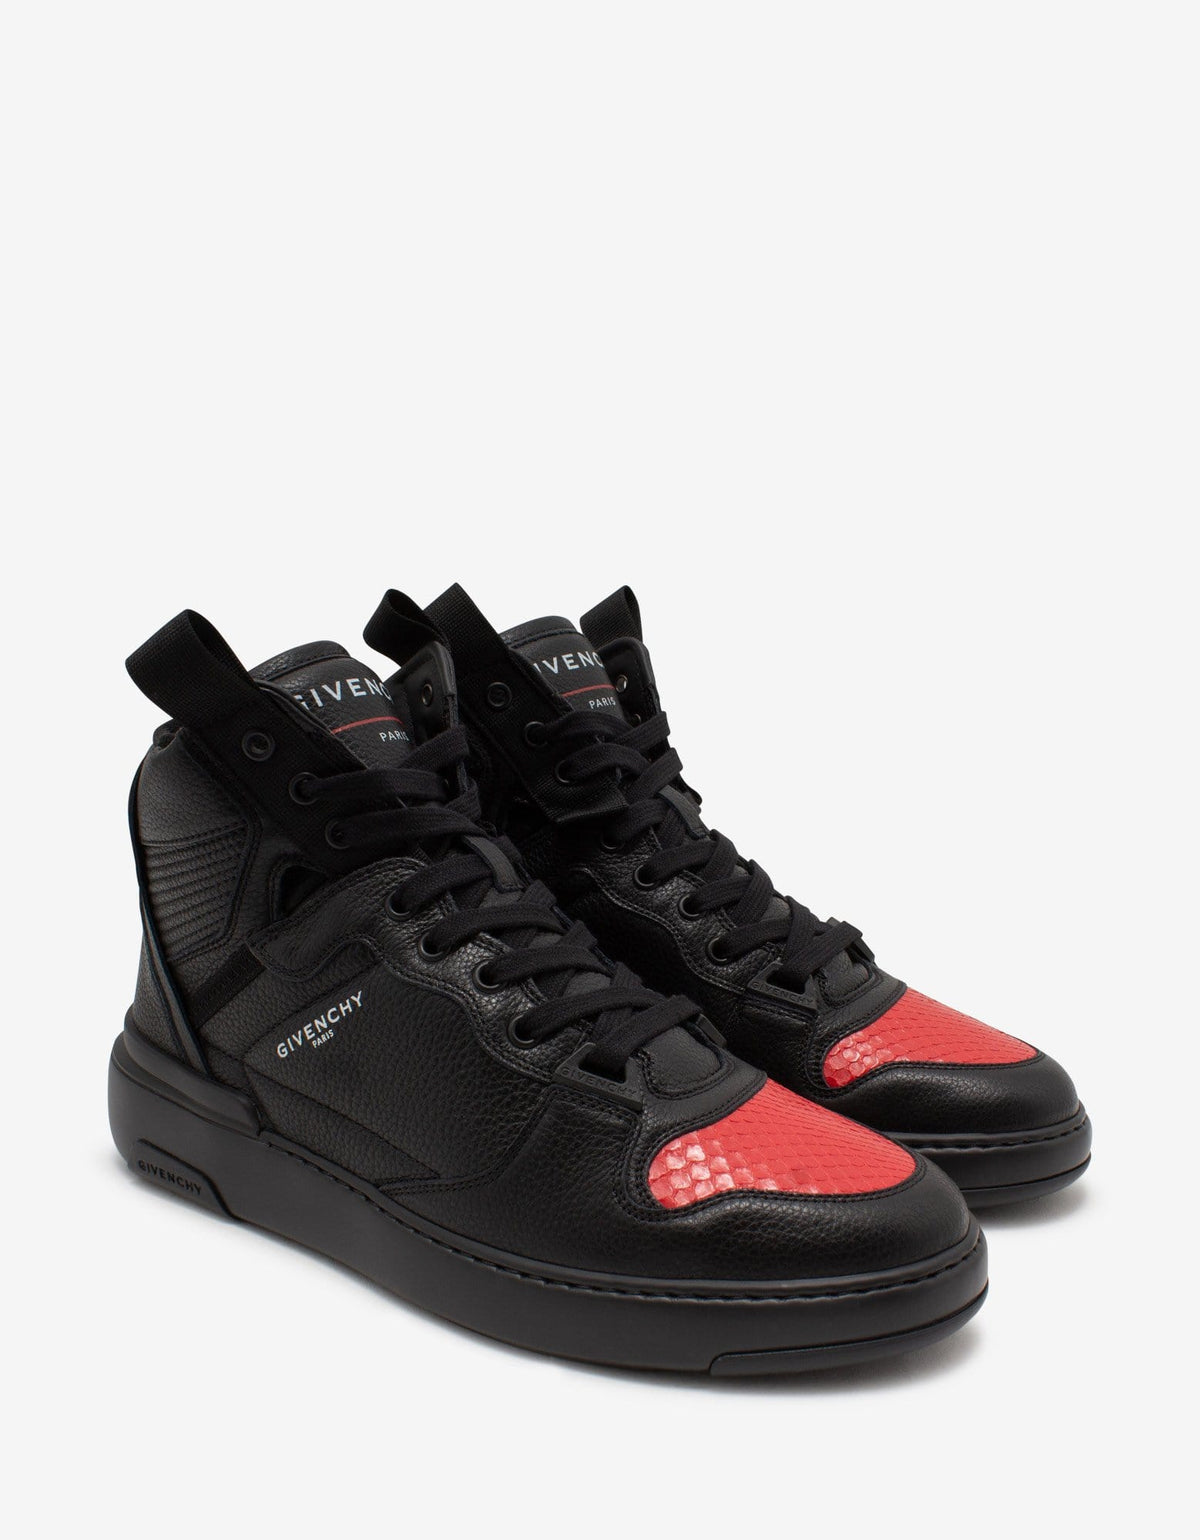 Givenchy Black Leather Wing High Trainers